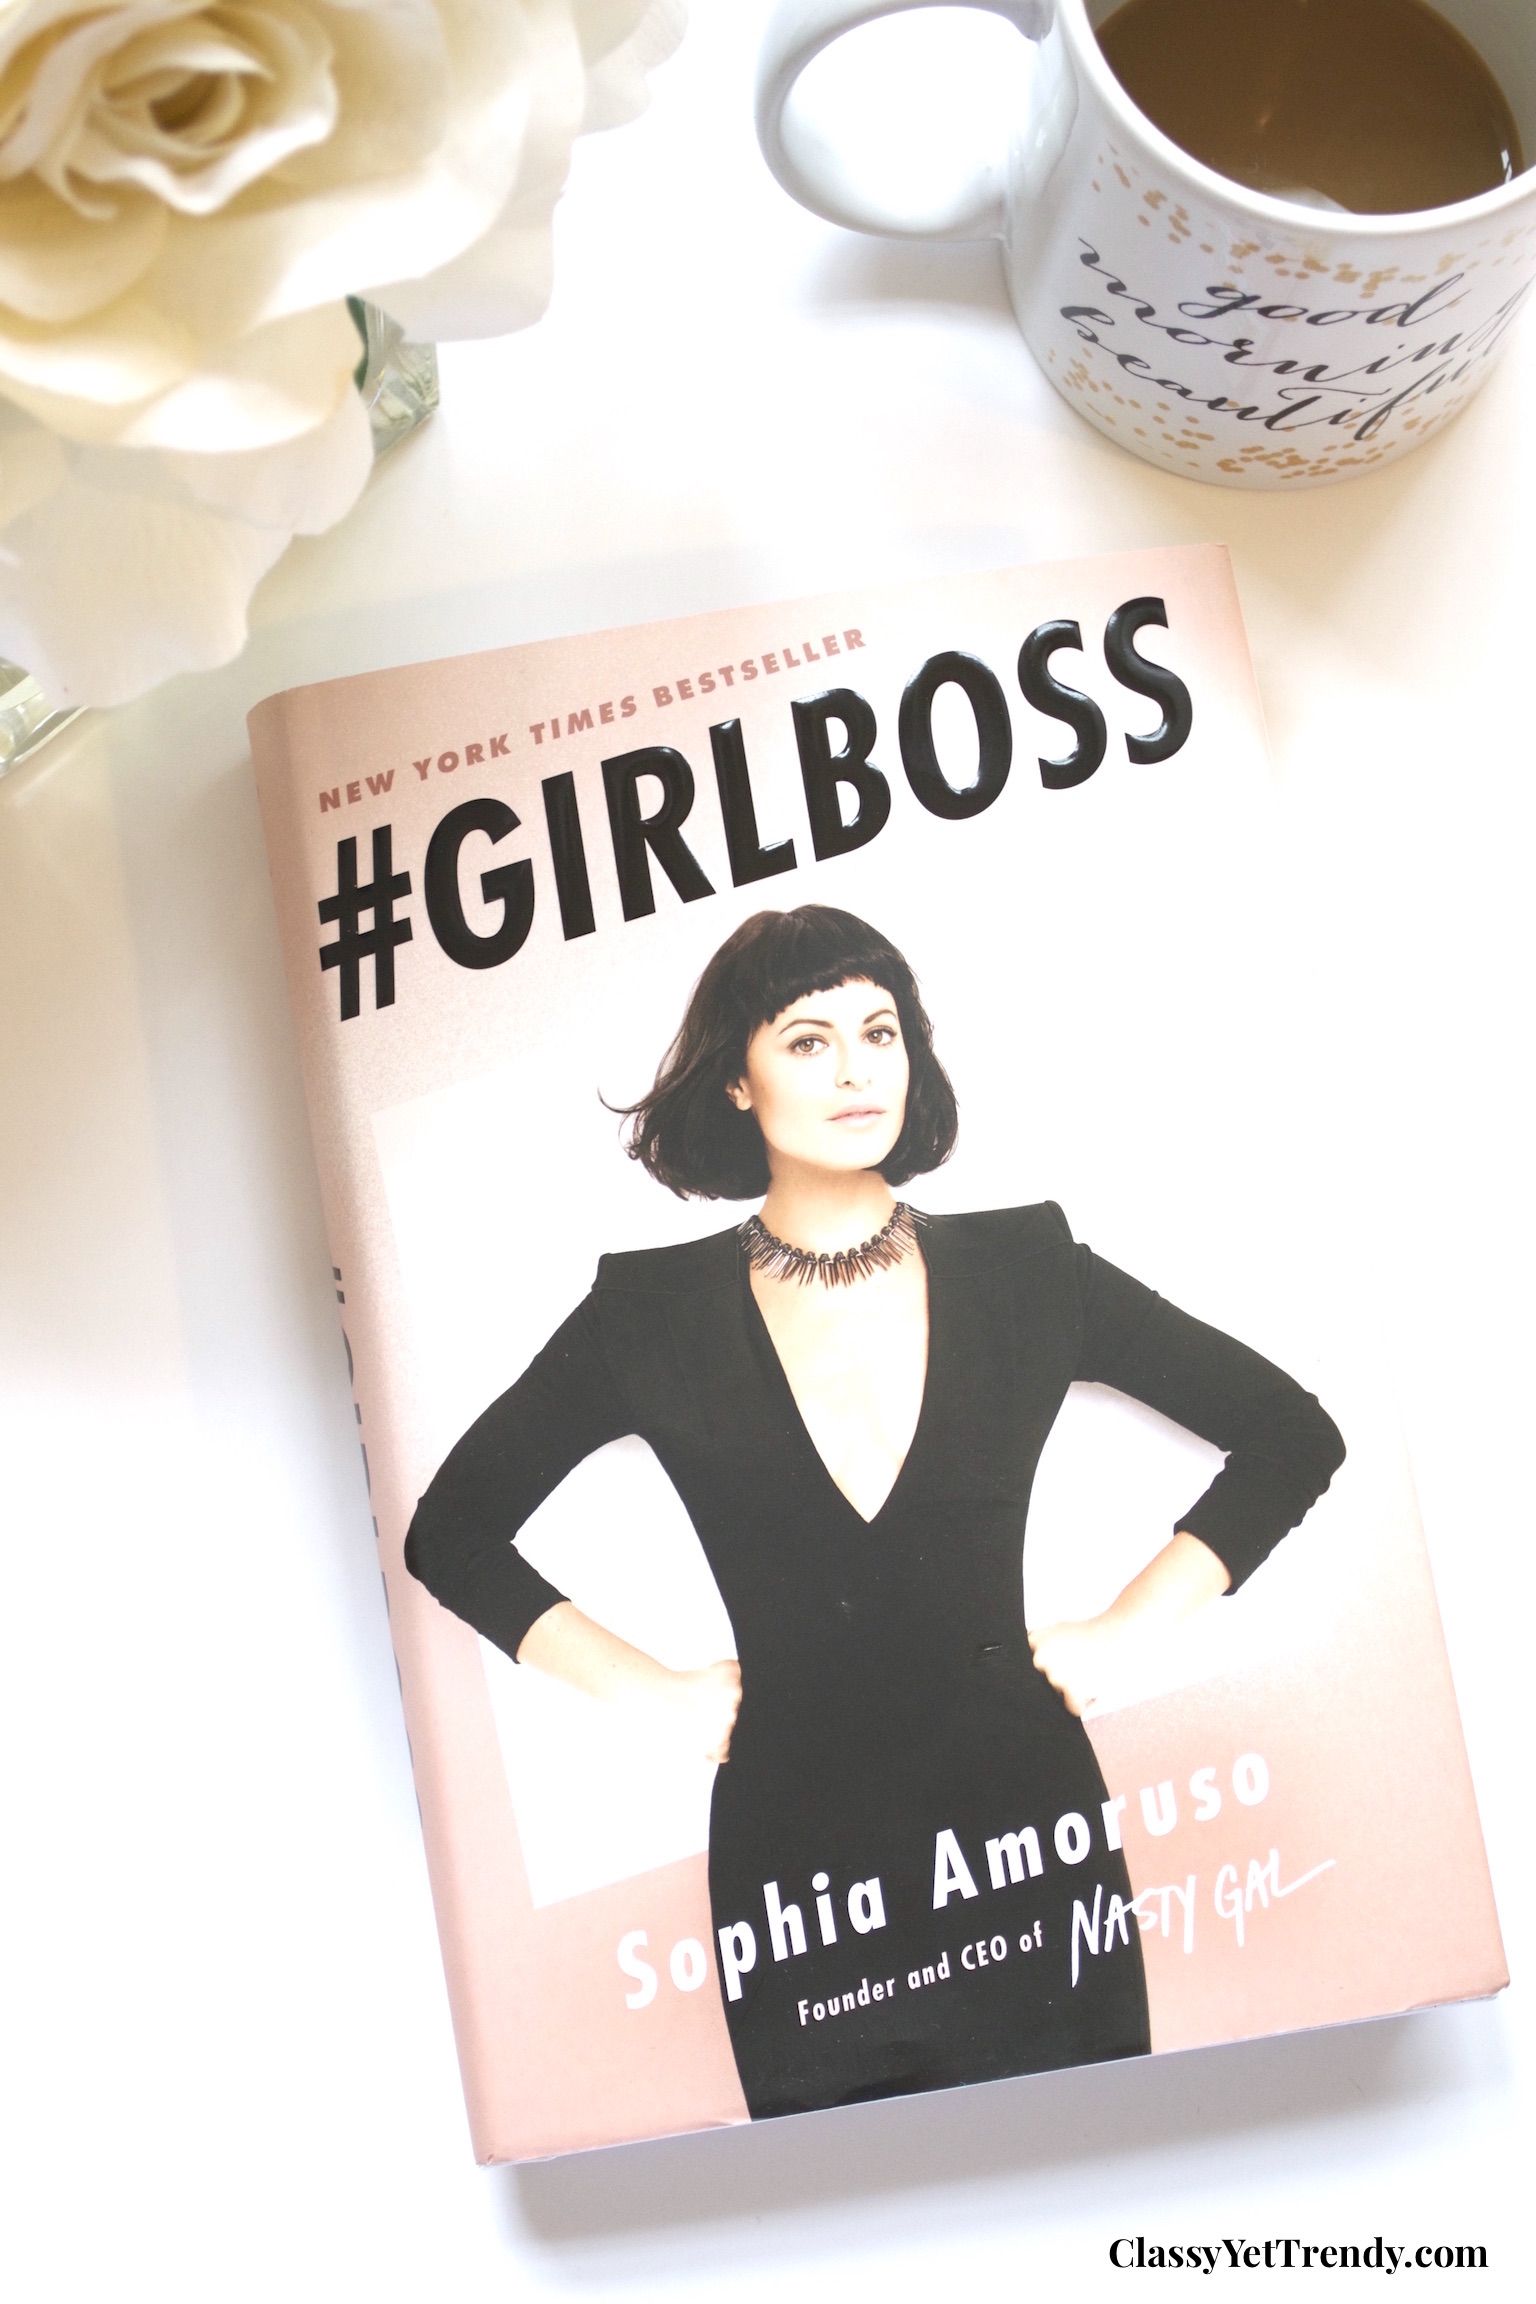 Reading these Fashion and Style books will make you feel like a #Girlboss! 